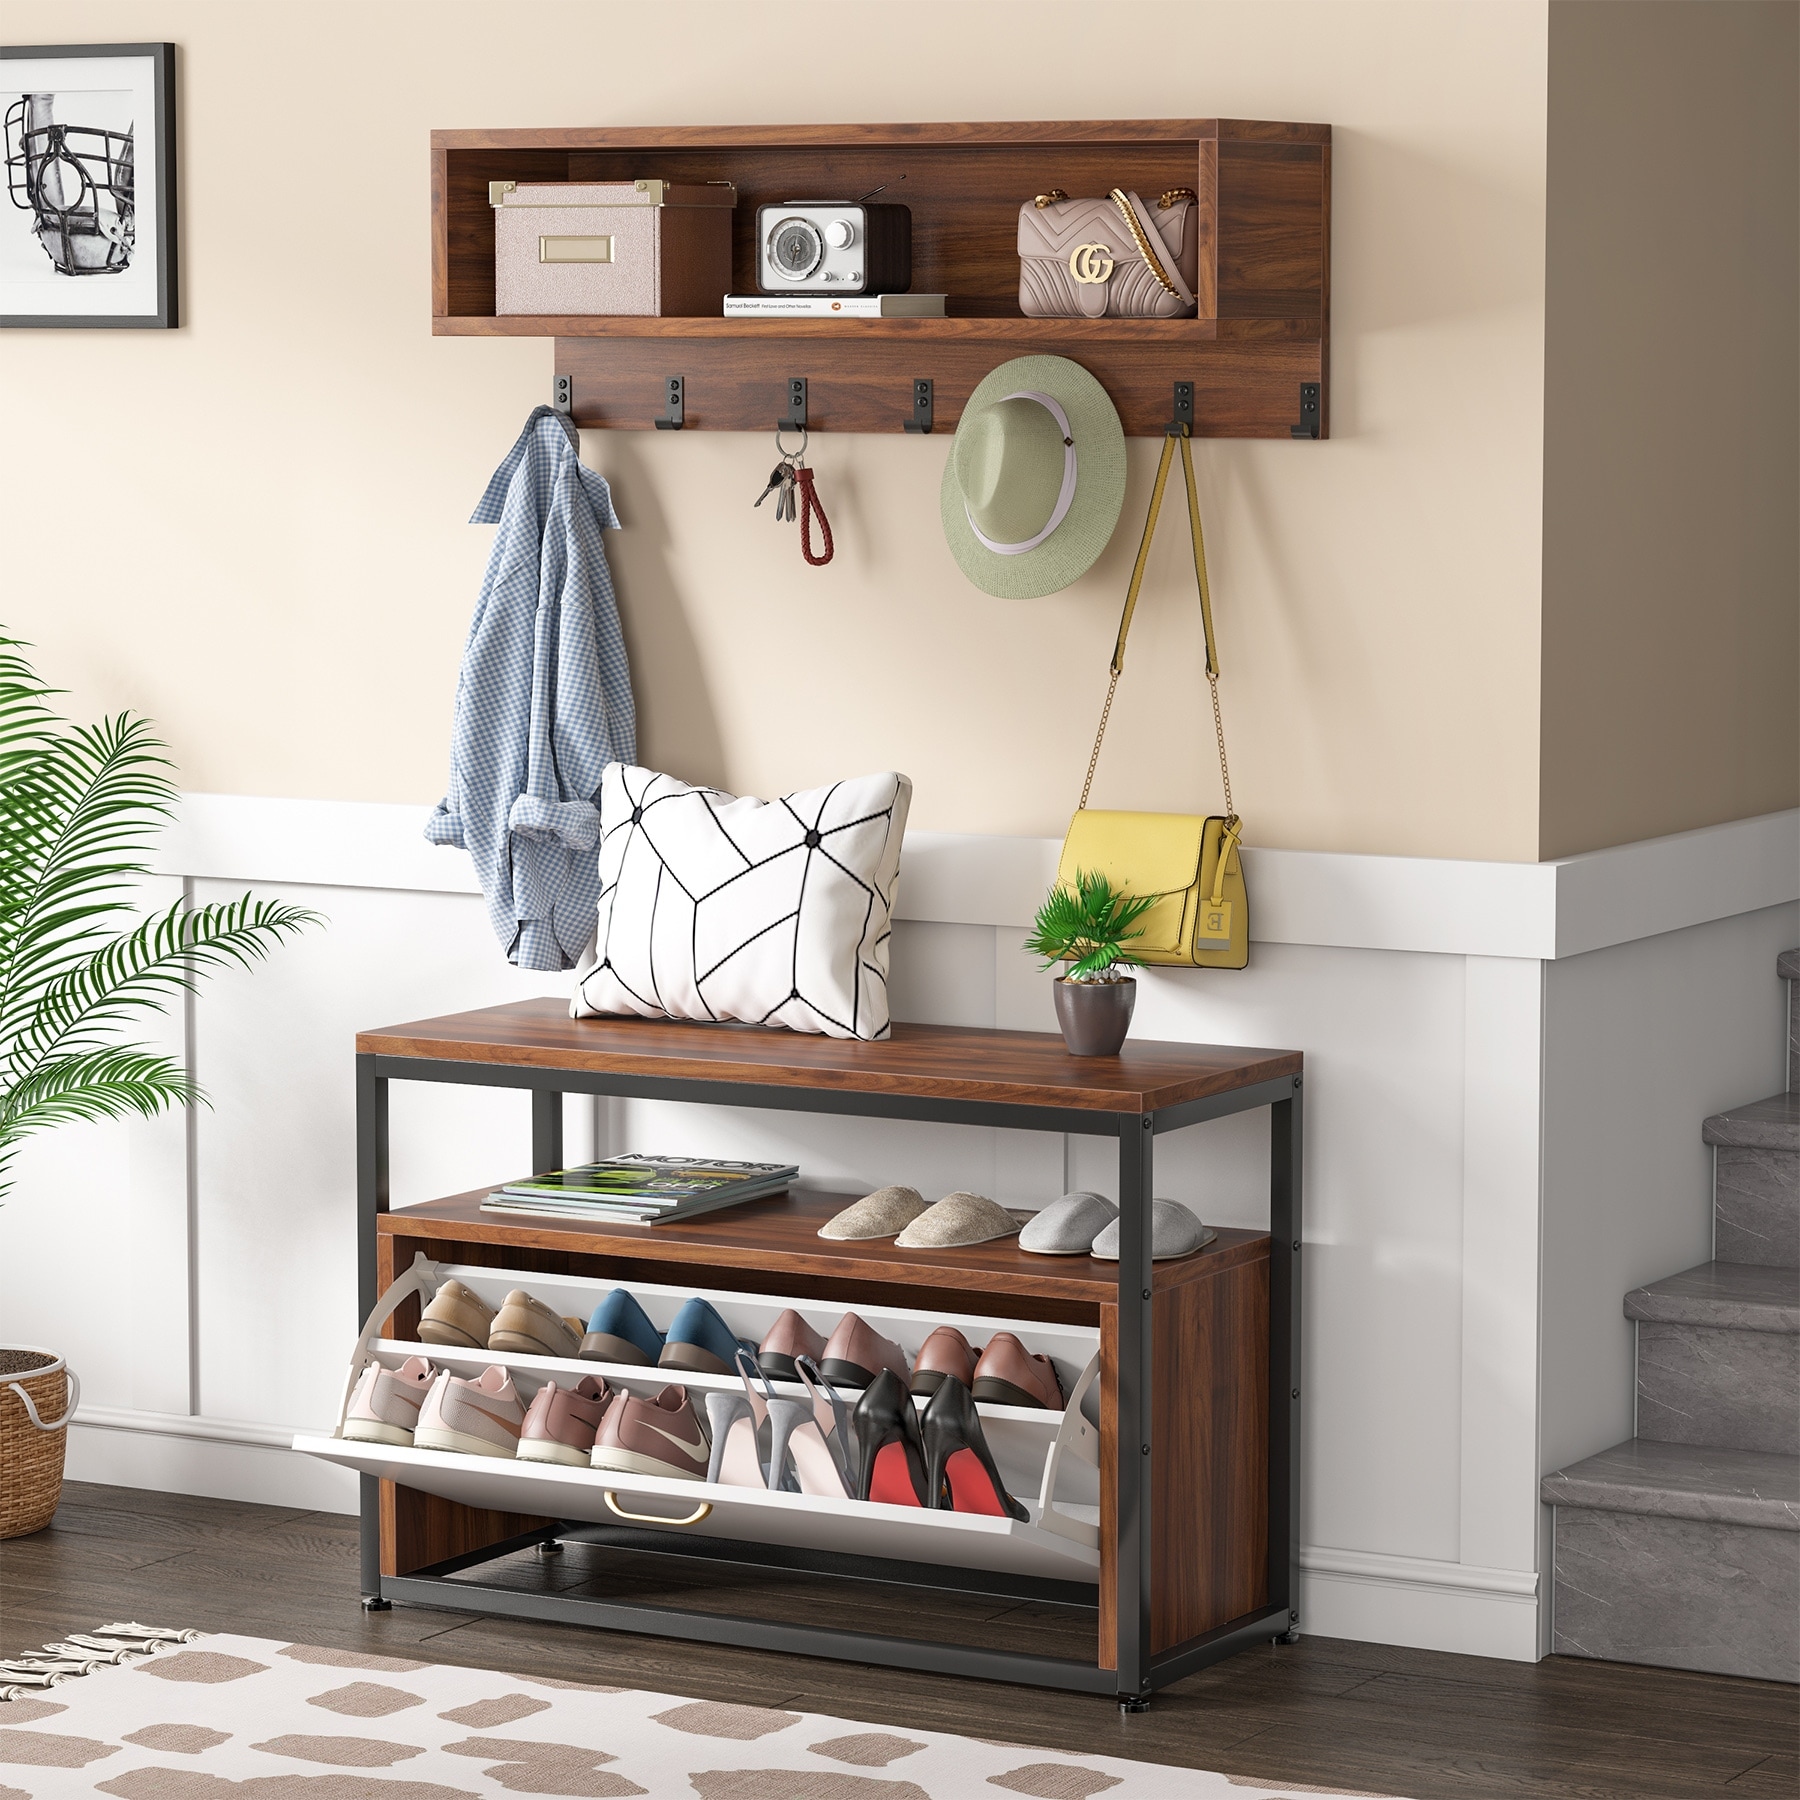 https://ak1.ostkcdn.com/images/products/is/images/direct/d8f40abfd795caefdc3703be753ef44766e43e78/Industrial-Entryway-Coat-Rack-Shoe-Bench-Set%2C-Hall-Tree-Coat-Shoe-Rack.jpg